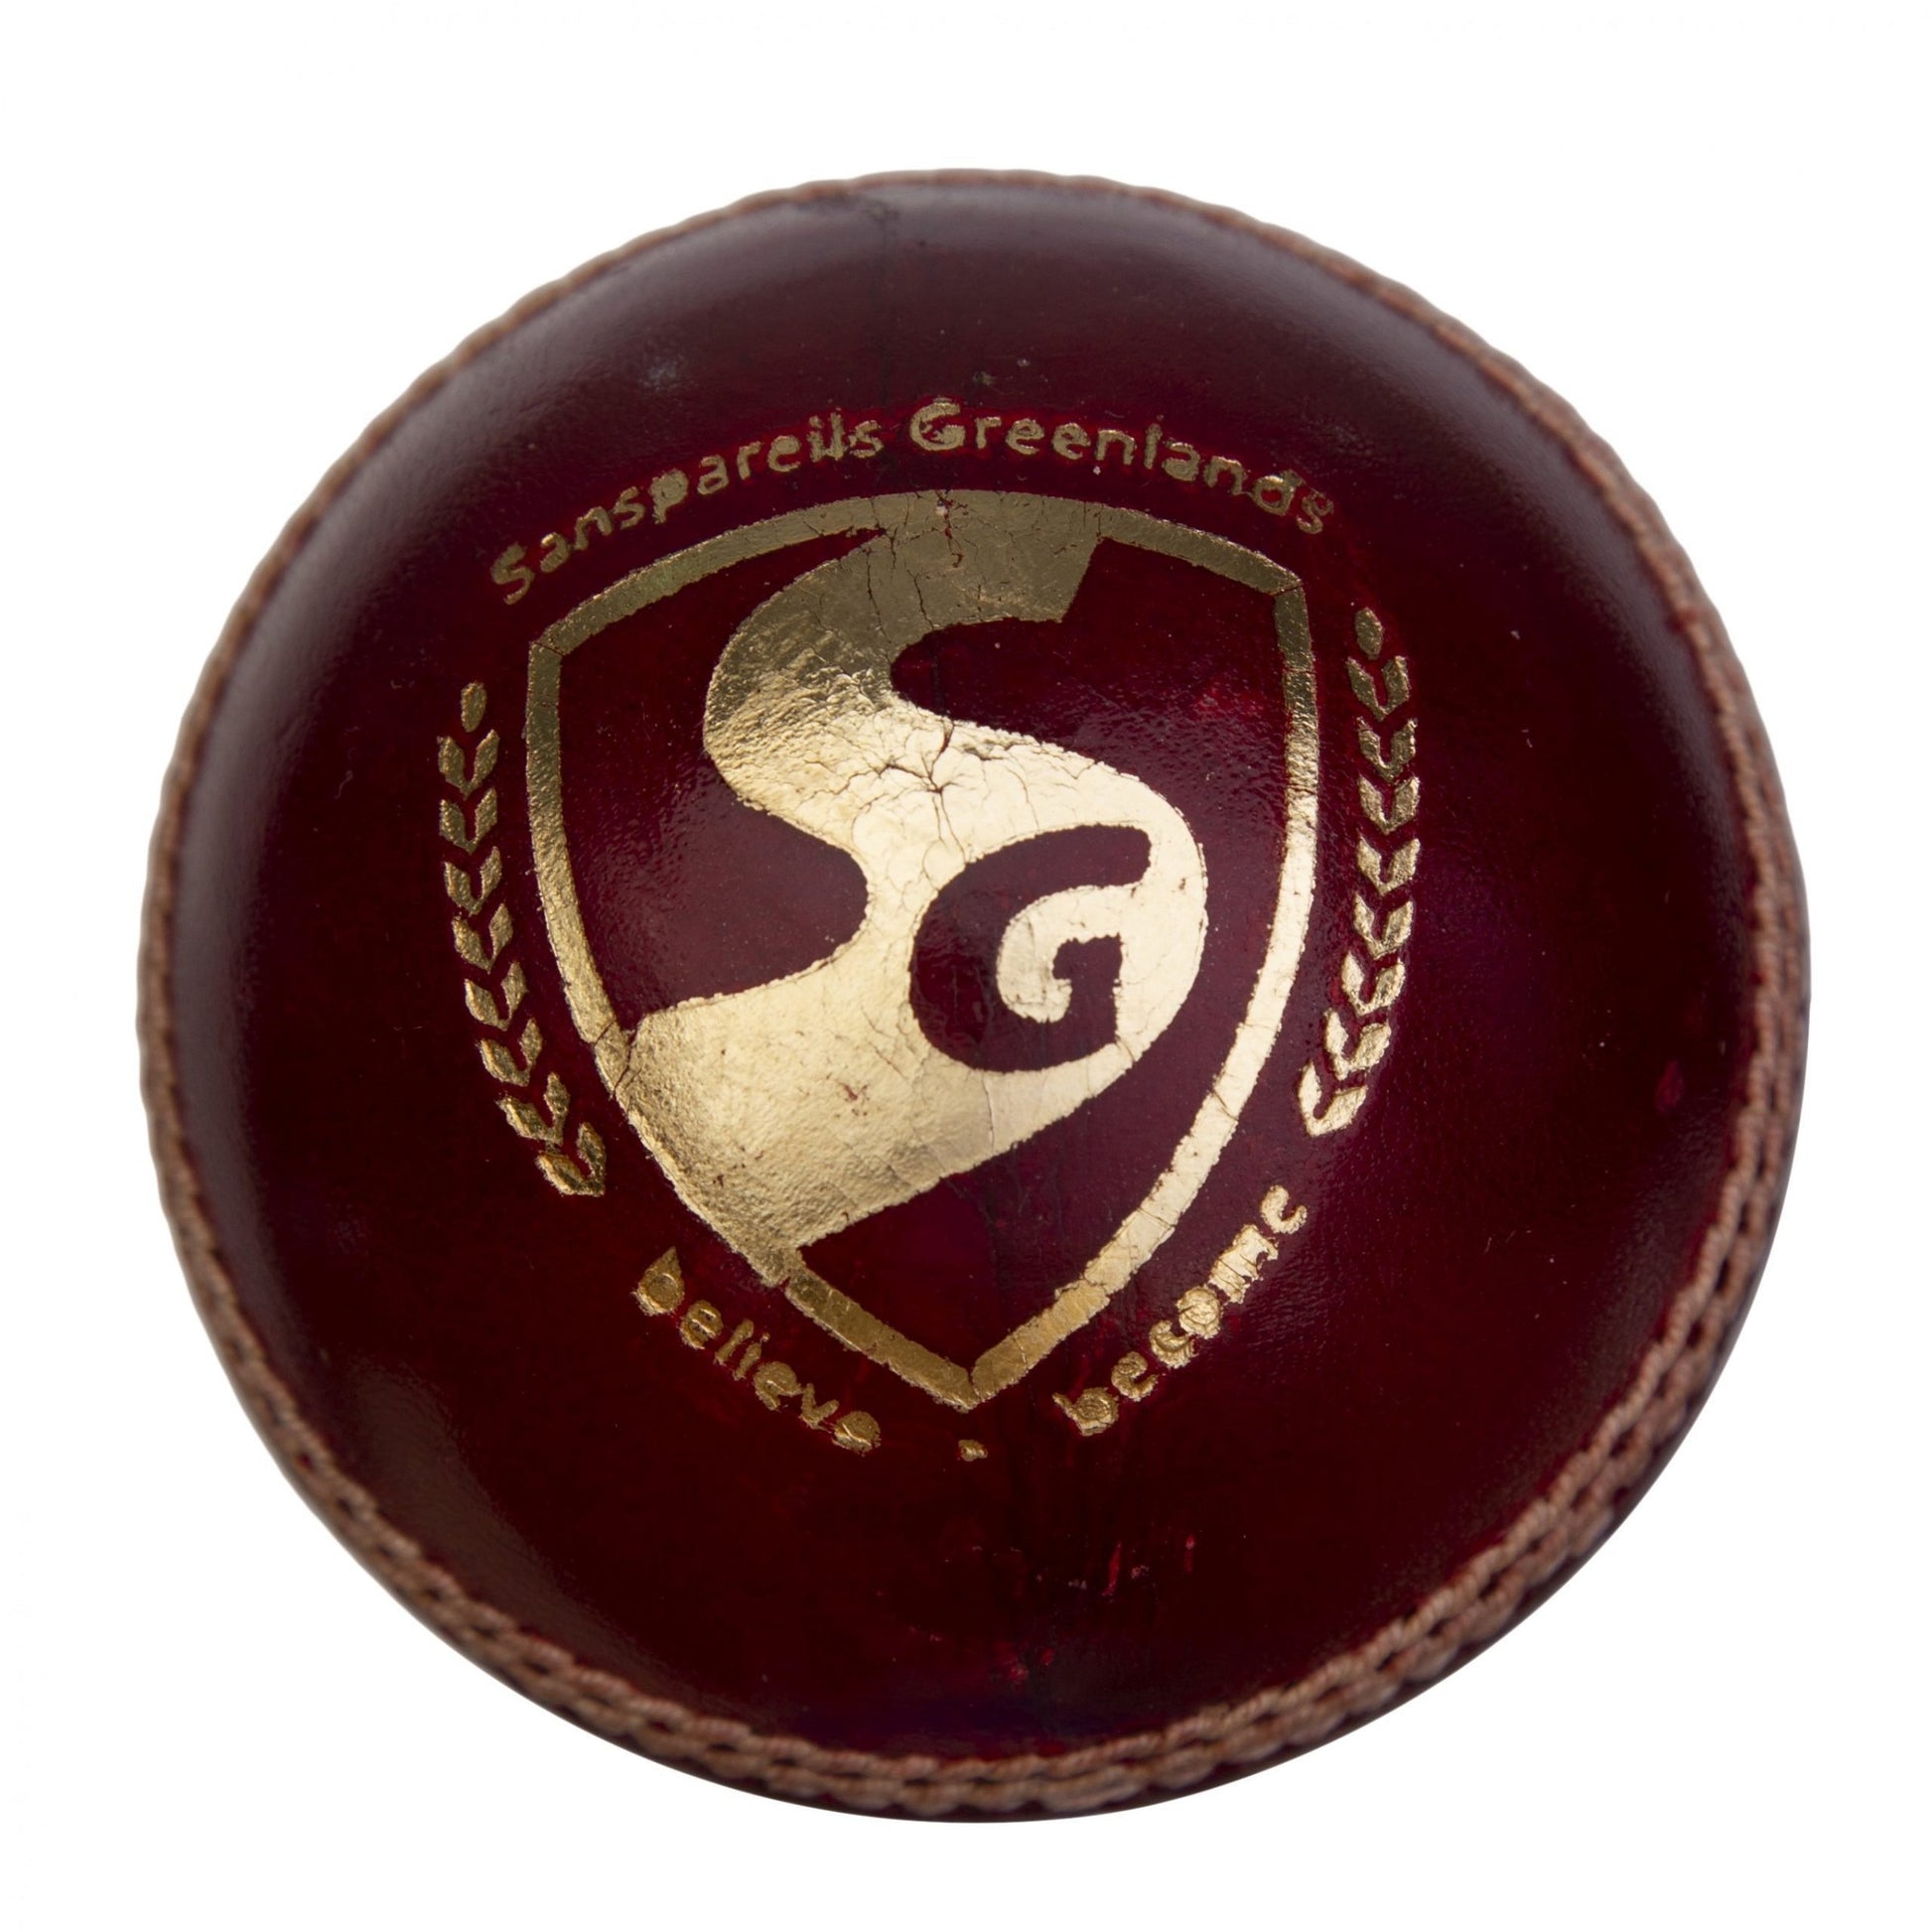 SG Test™ Superior Quality Water Proof Cricket Leather Ball